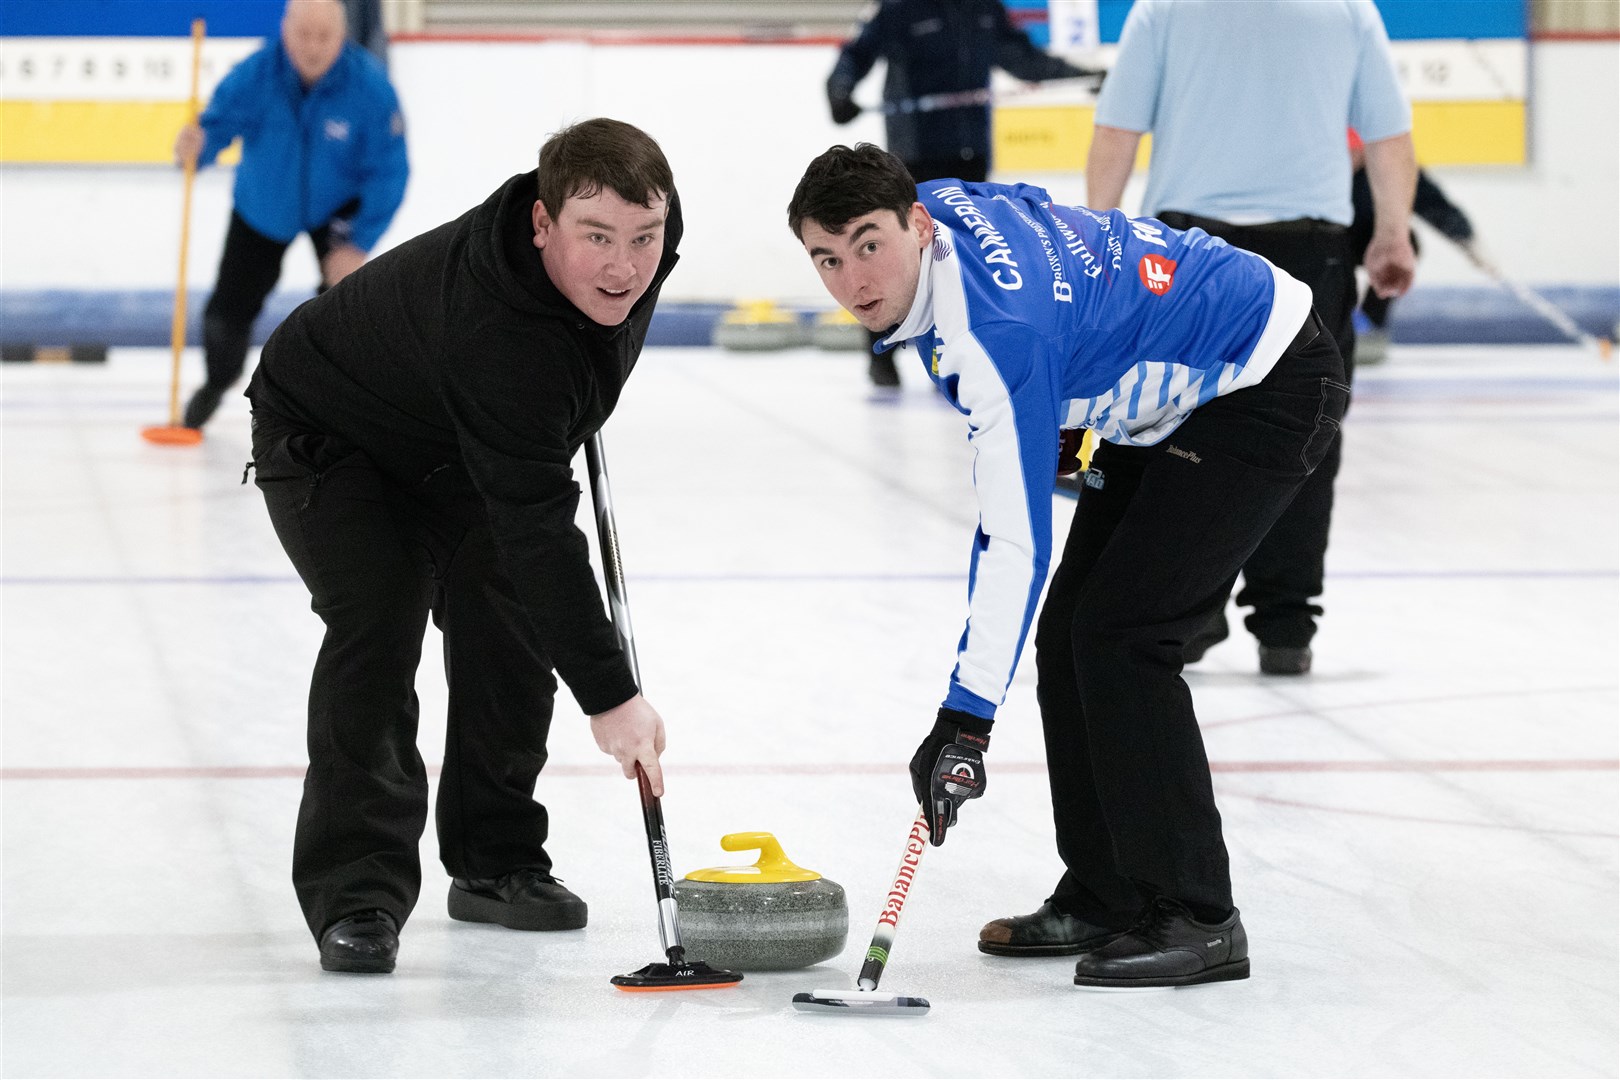 Matthew Smith (left) and Gavin Cameron (right) judging when's best to start sweeping. Picture: Beth Taylor.